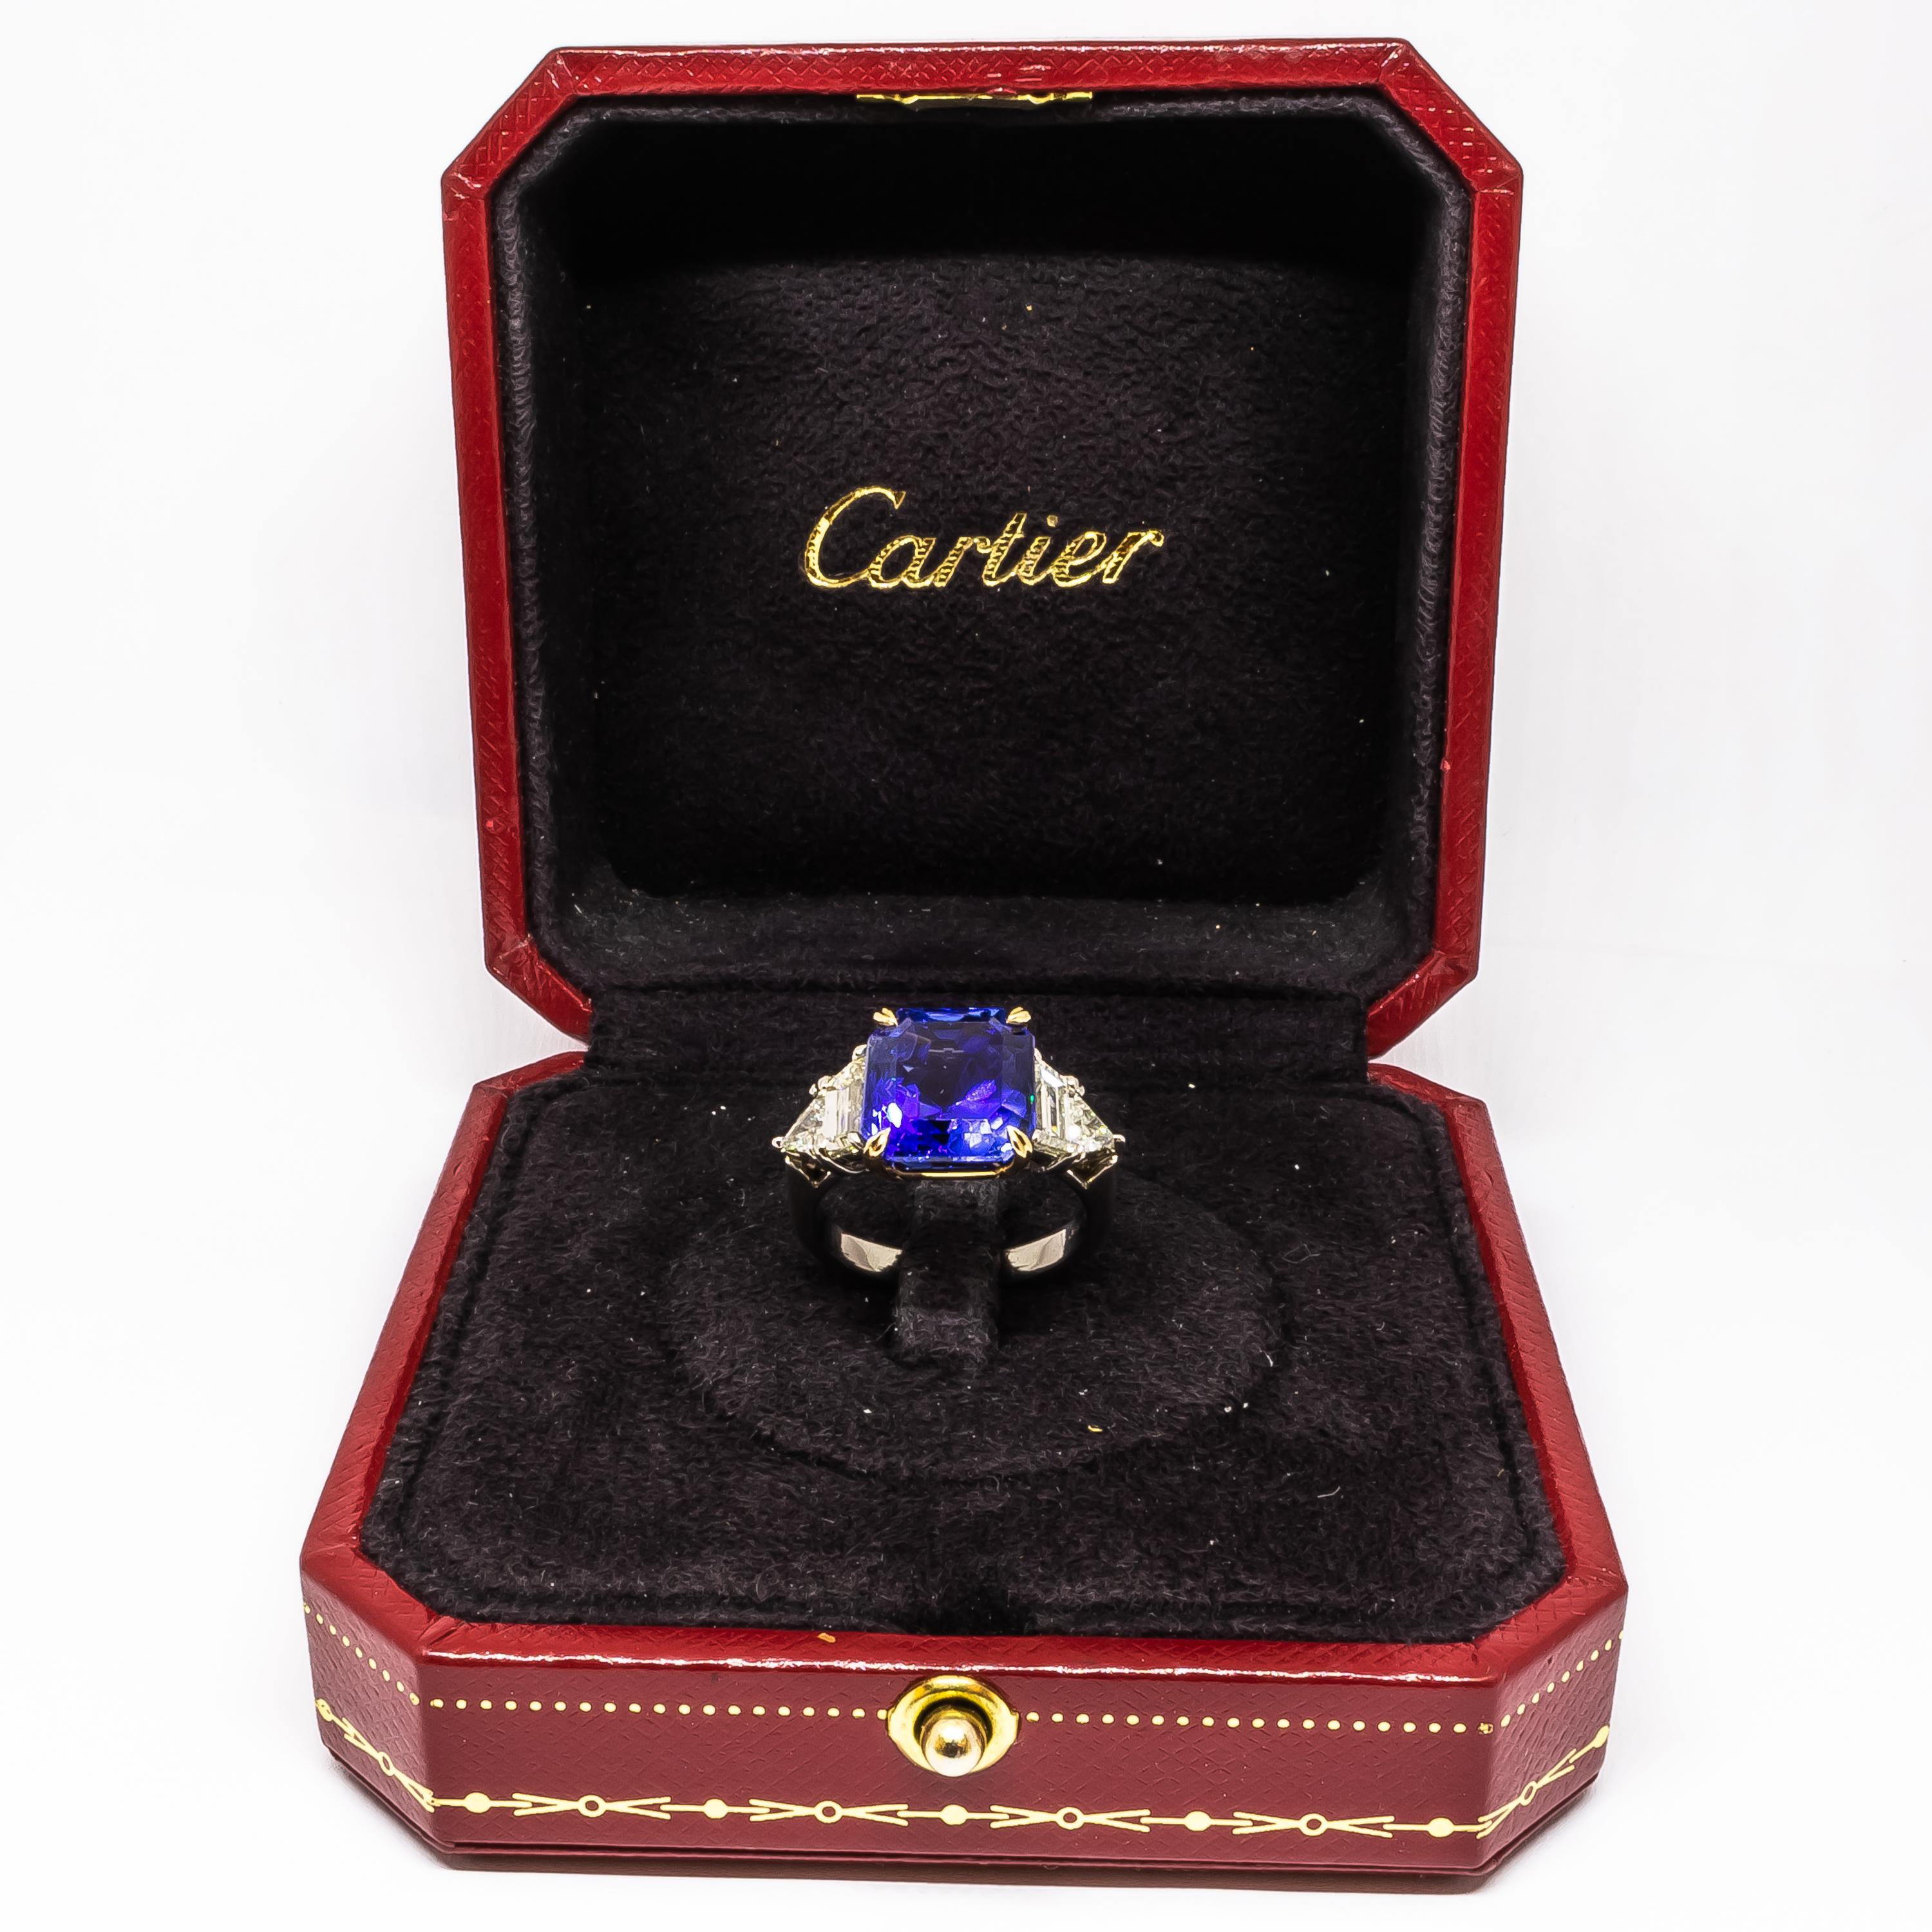 Cartier 7.51 Carat GIA Certified Burma Sapphire, Diamond, Gold and Platinum Ring For Sale 2